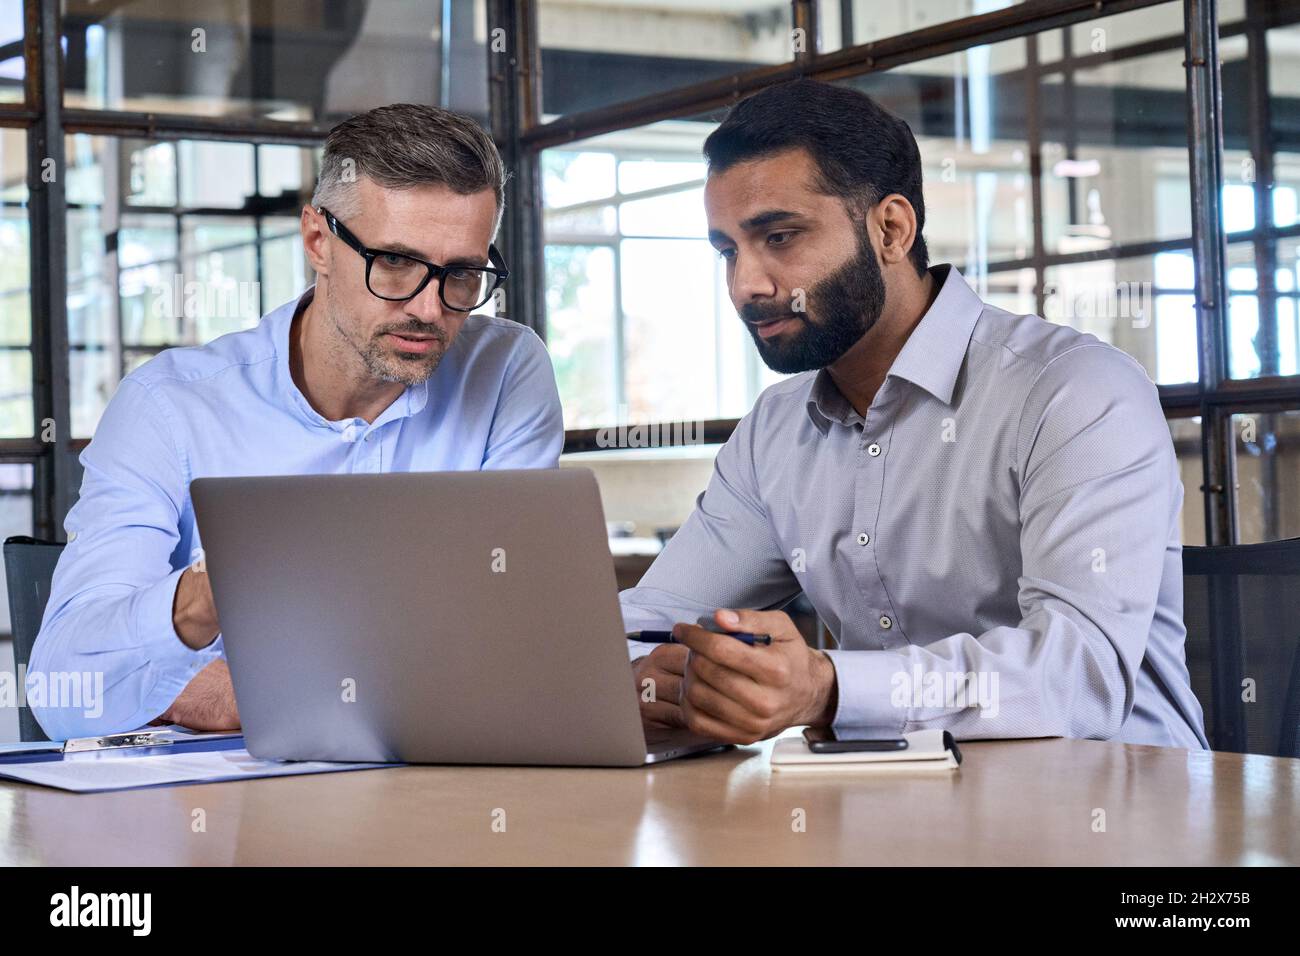 Two business men analysts discussing data management using laptop computer. Stock Photo